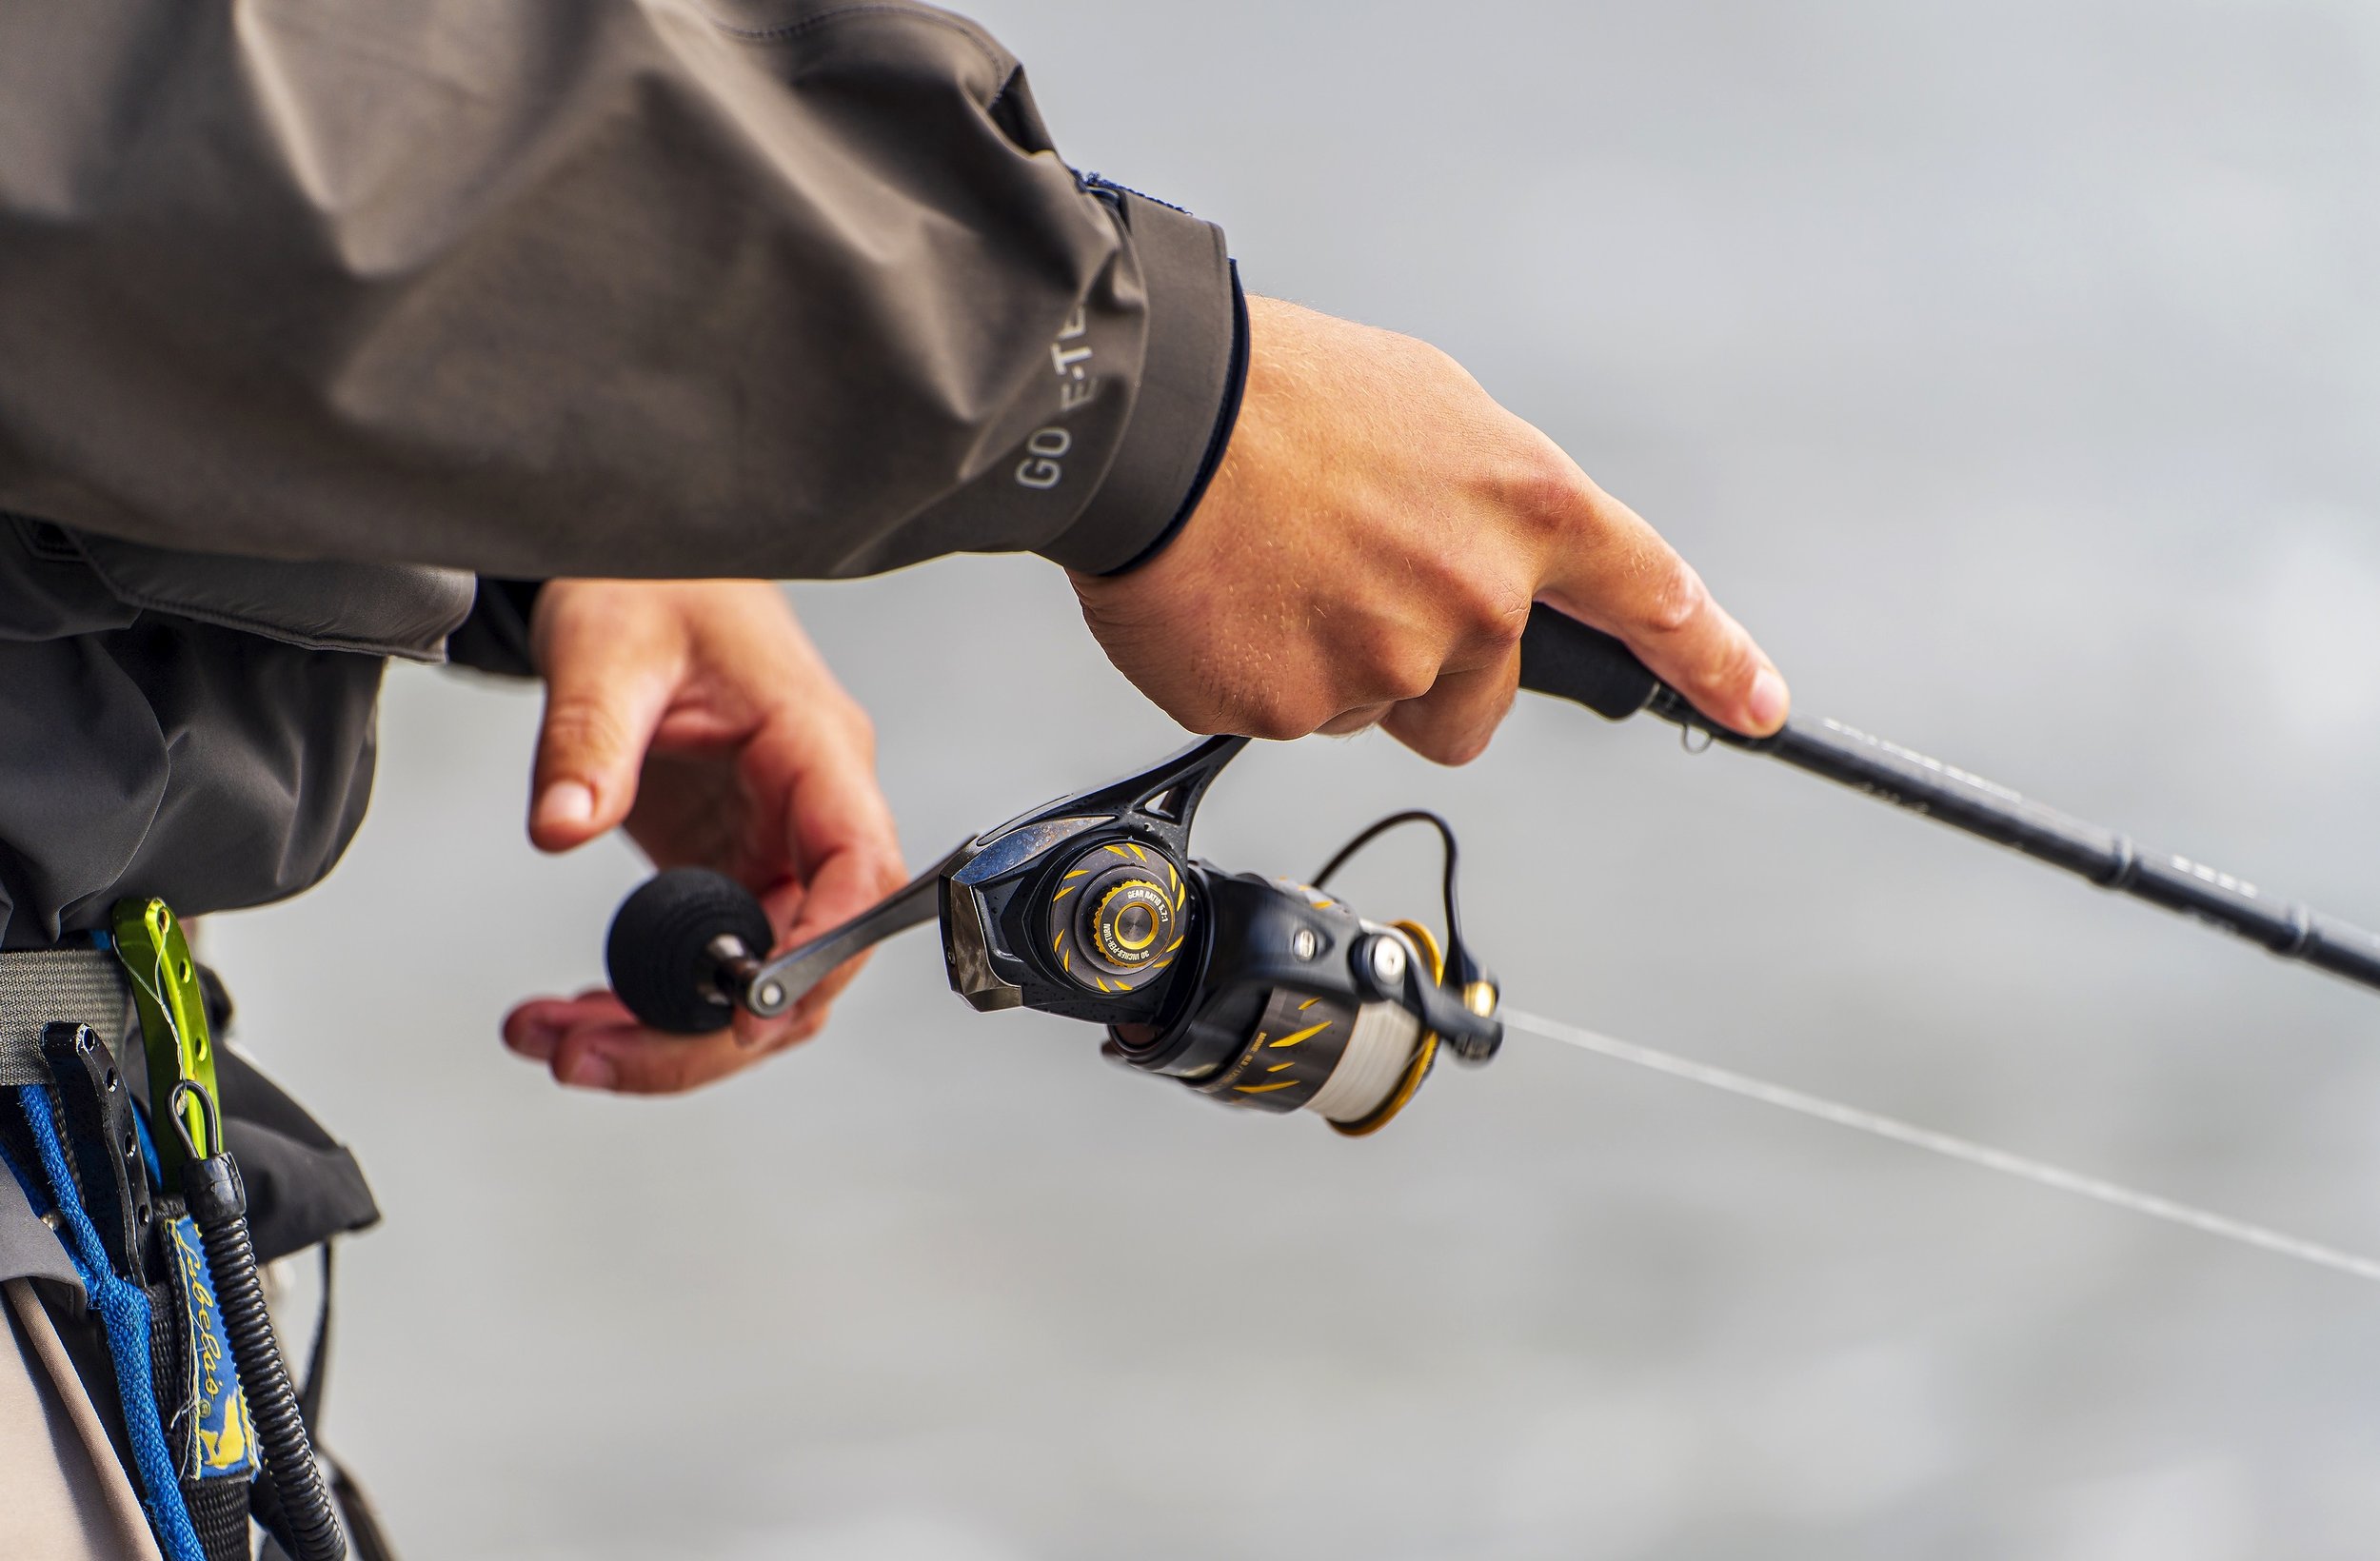 This Fishing Line Spooler Will Make Your Life Easier—And It's On